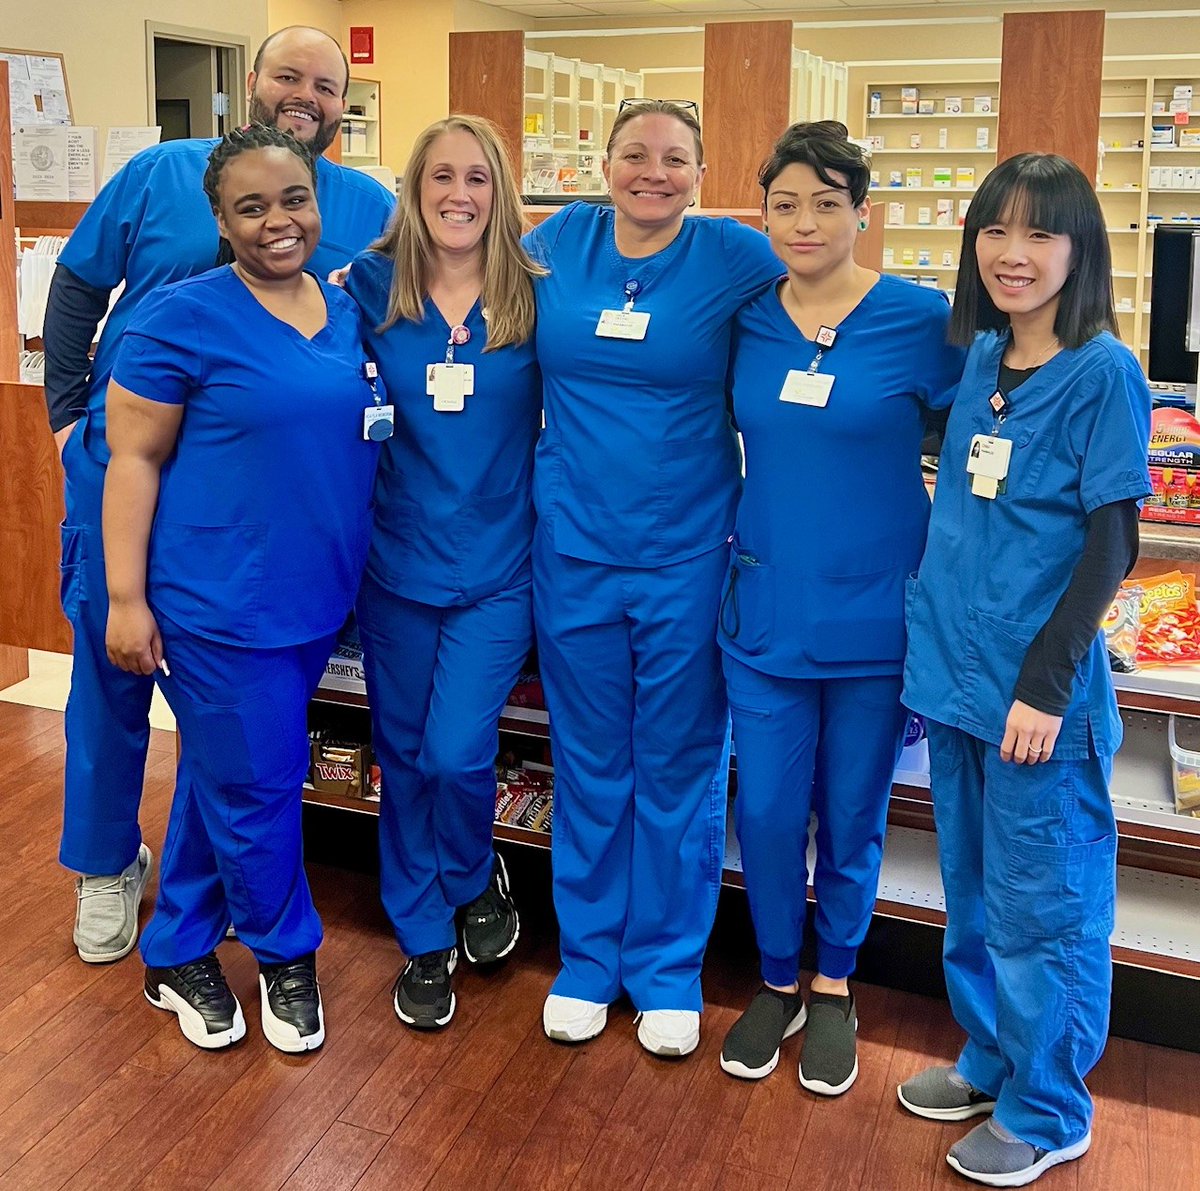 A special shout out to the retail pharmacy team @HCAFLHealthcare (Memorial Hospital)​ - Luxia Tran loves to be onsite with you all! #teamworkmakesthedreamwork #excellentpatientcare #pharmily